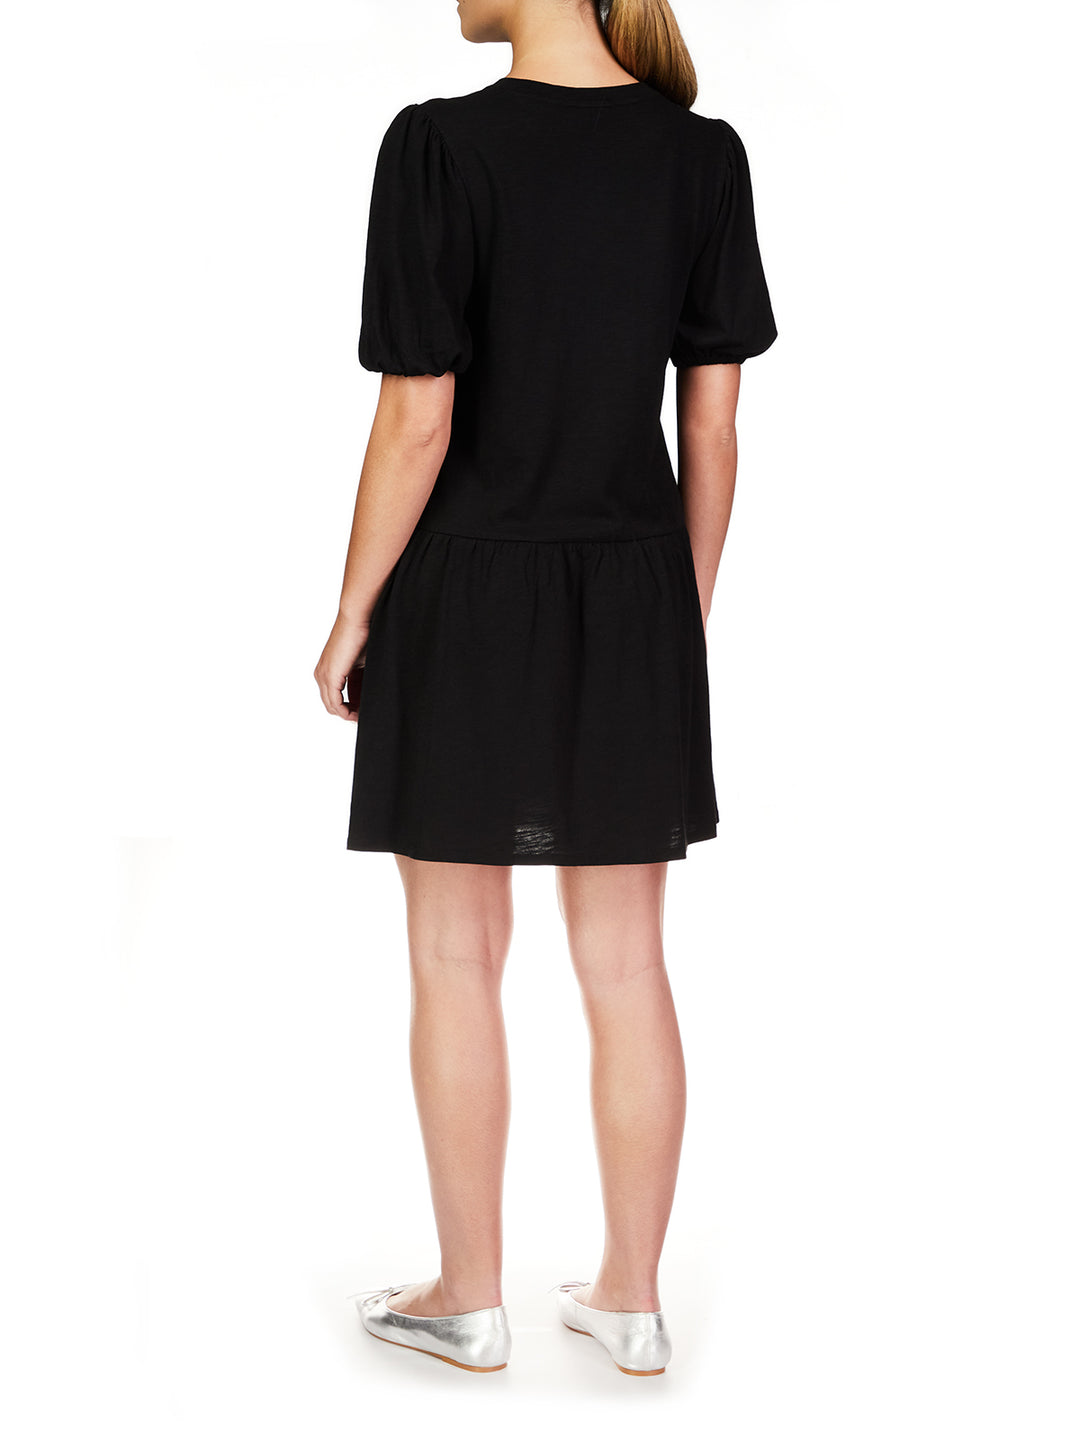 ONLY WAY KNIT DRESS-BLACK - Kingfisher Road - Online Boutique